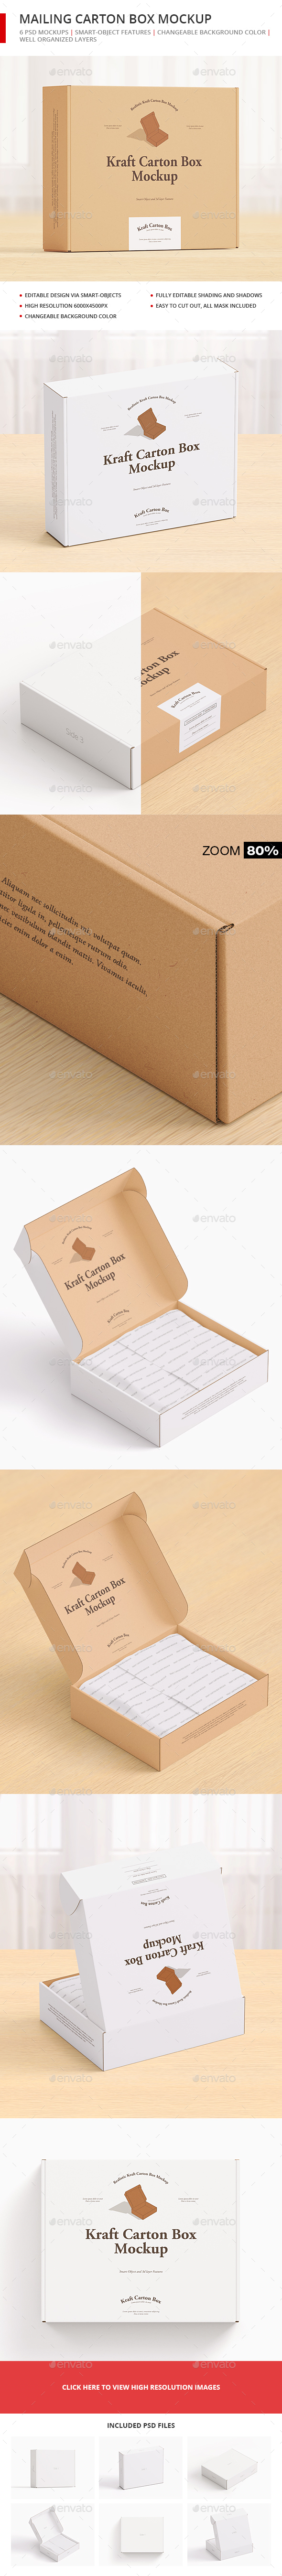 Packaging Mockups From Graphicriver